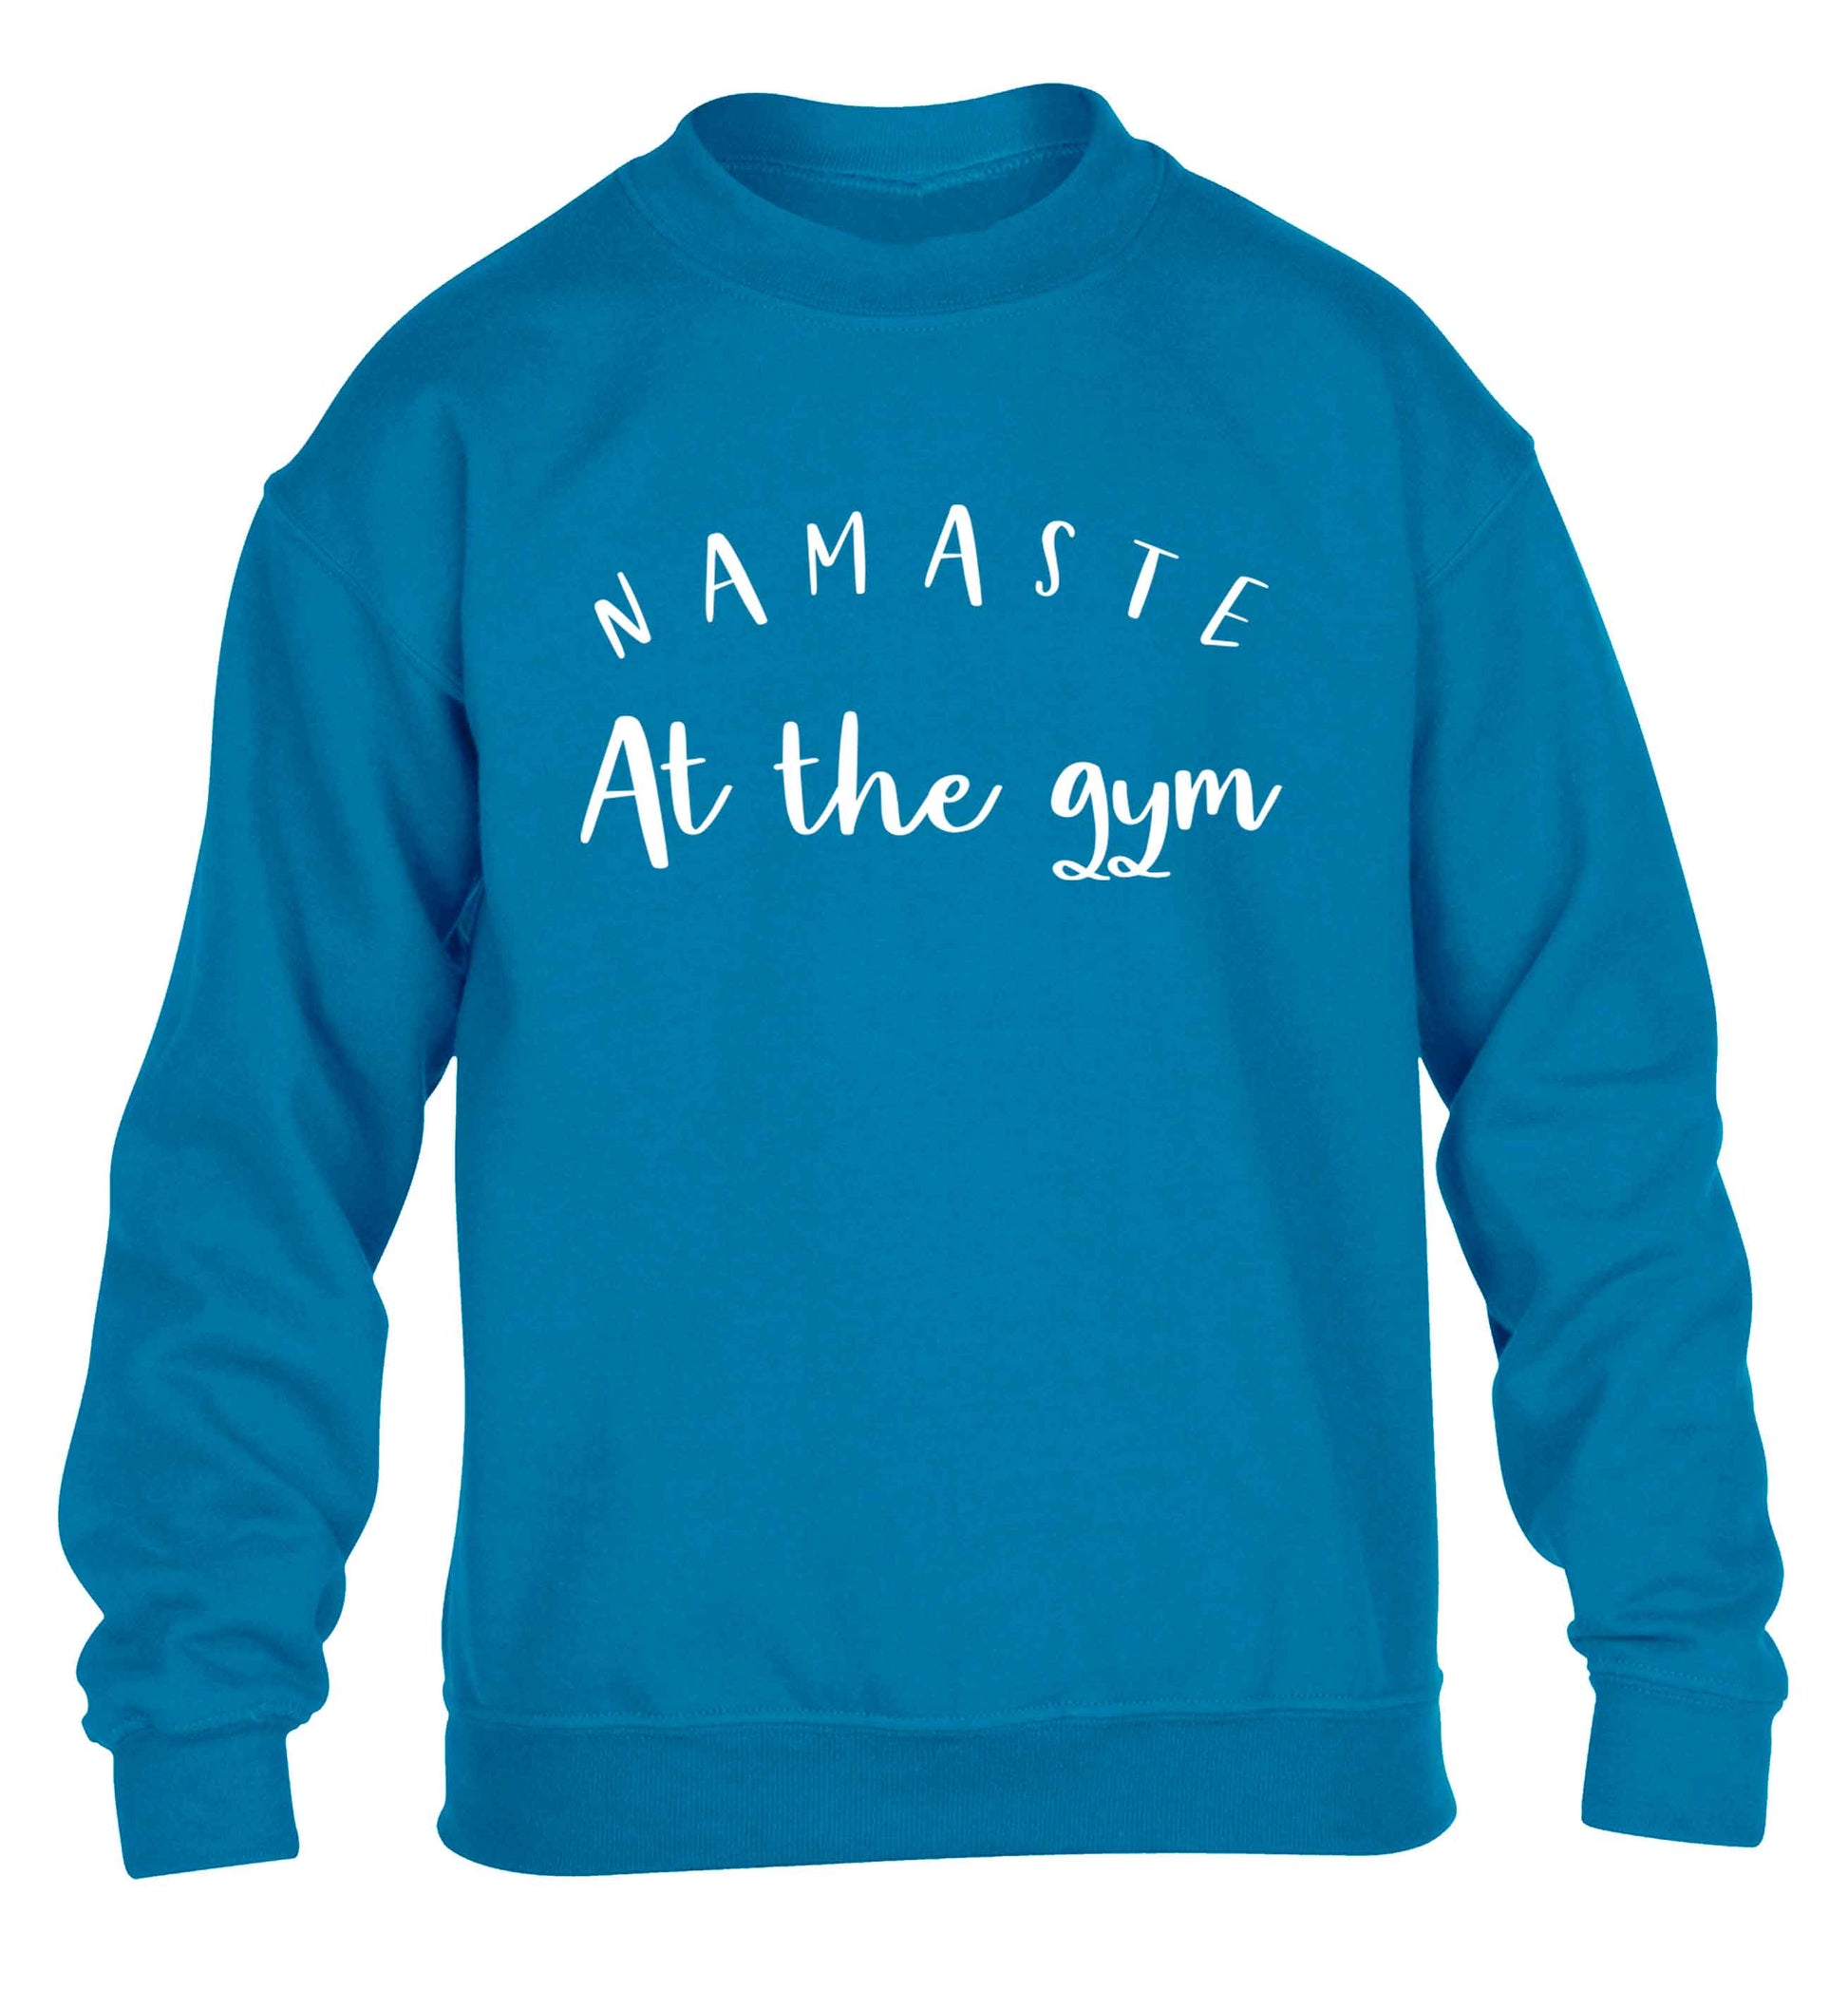 Namaste at the gym children's blue sweater 12-13 Years